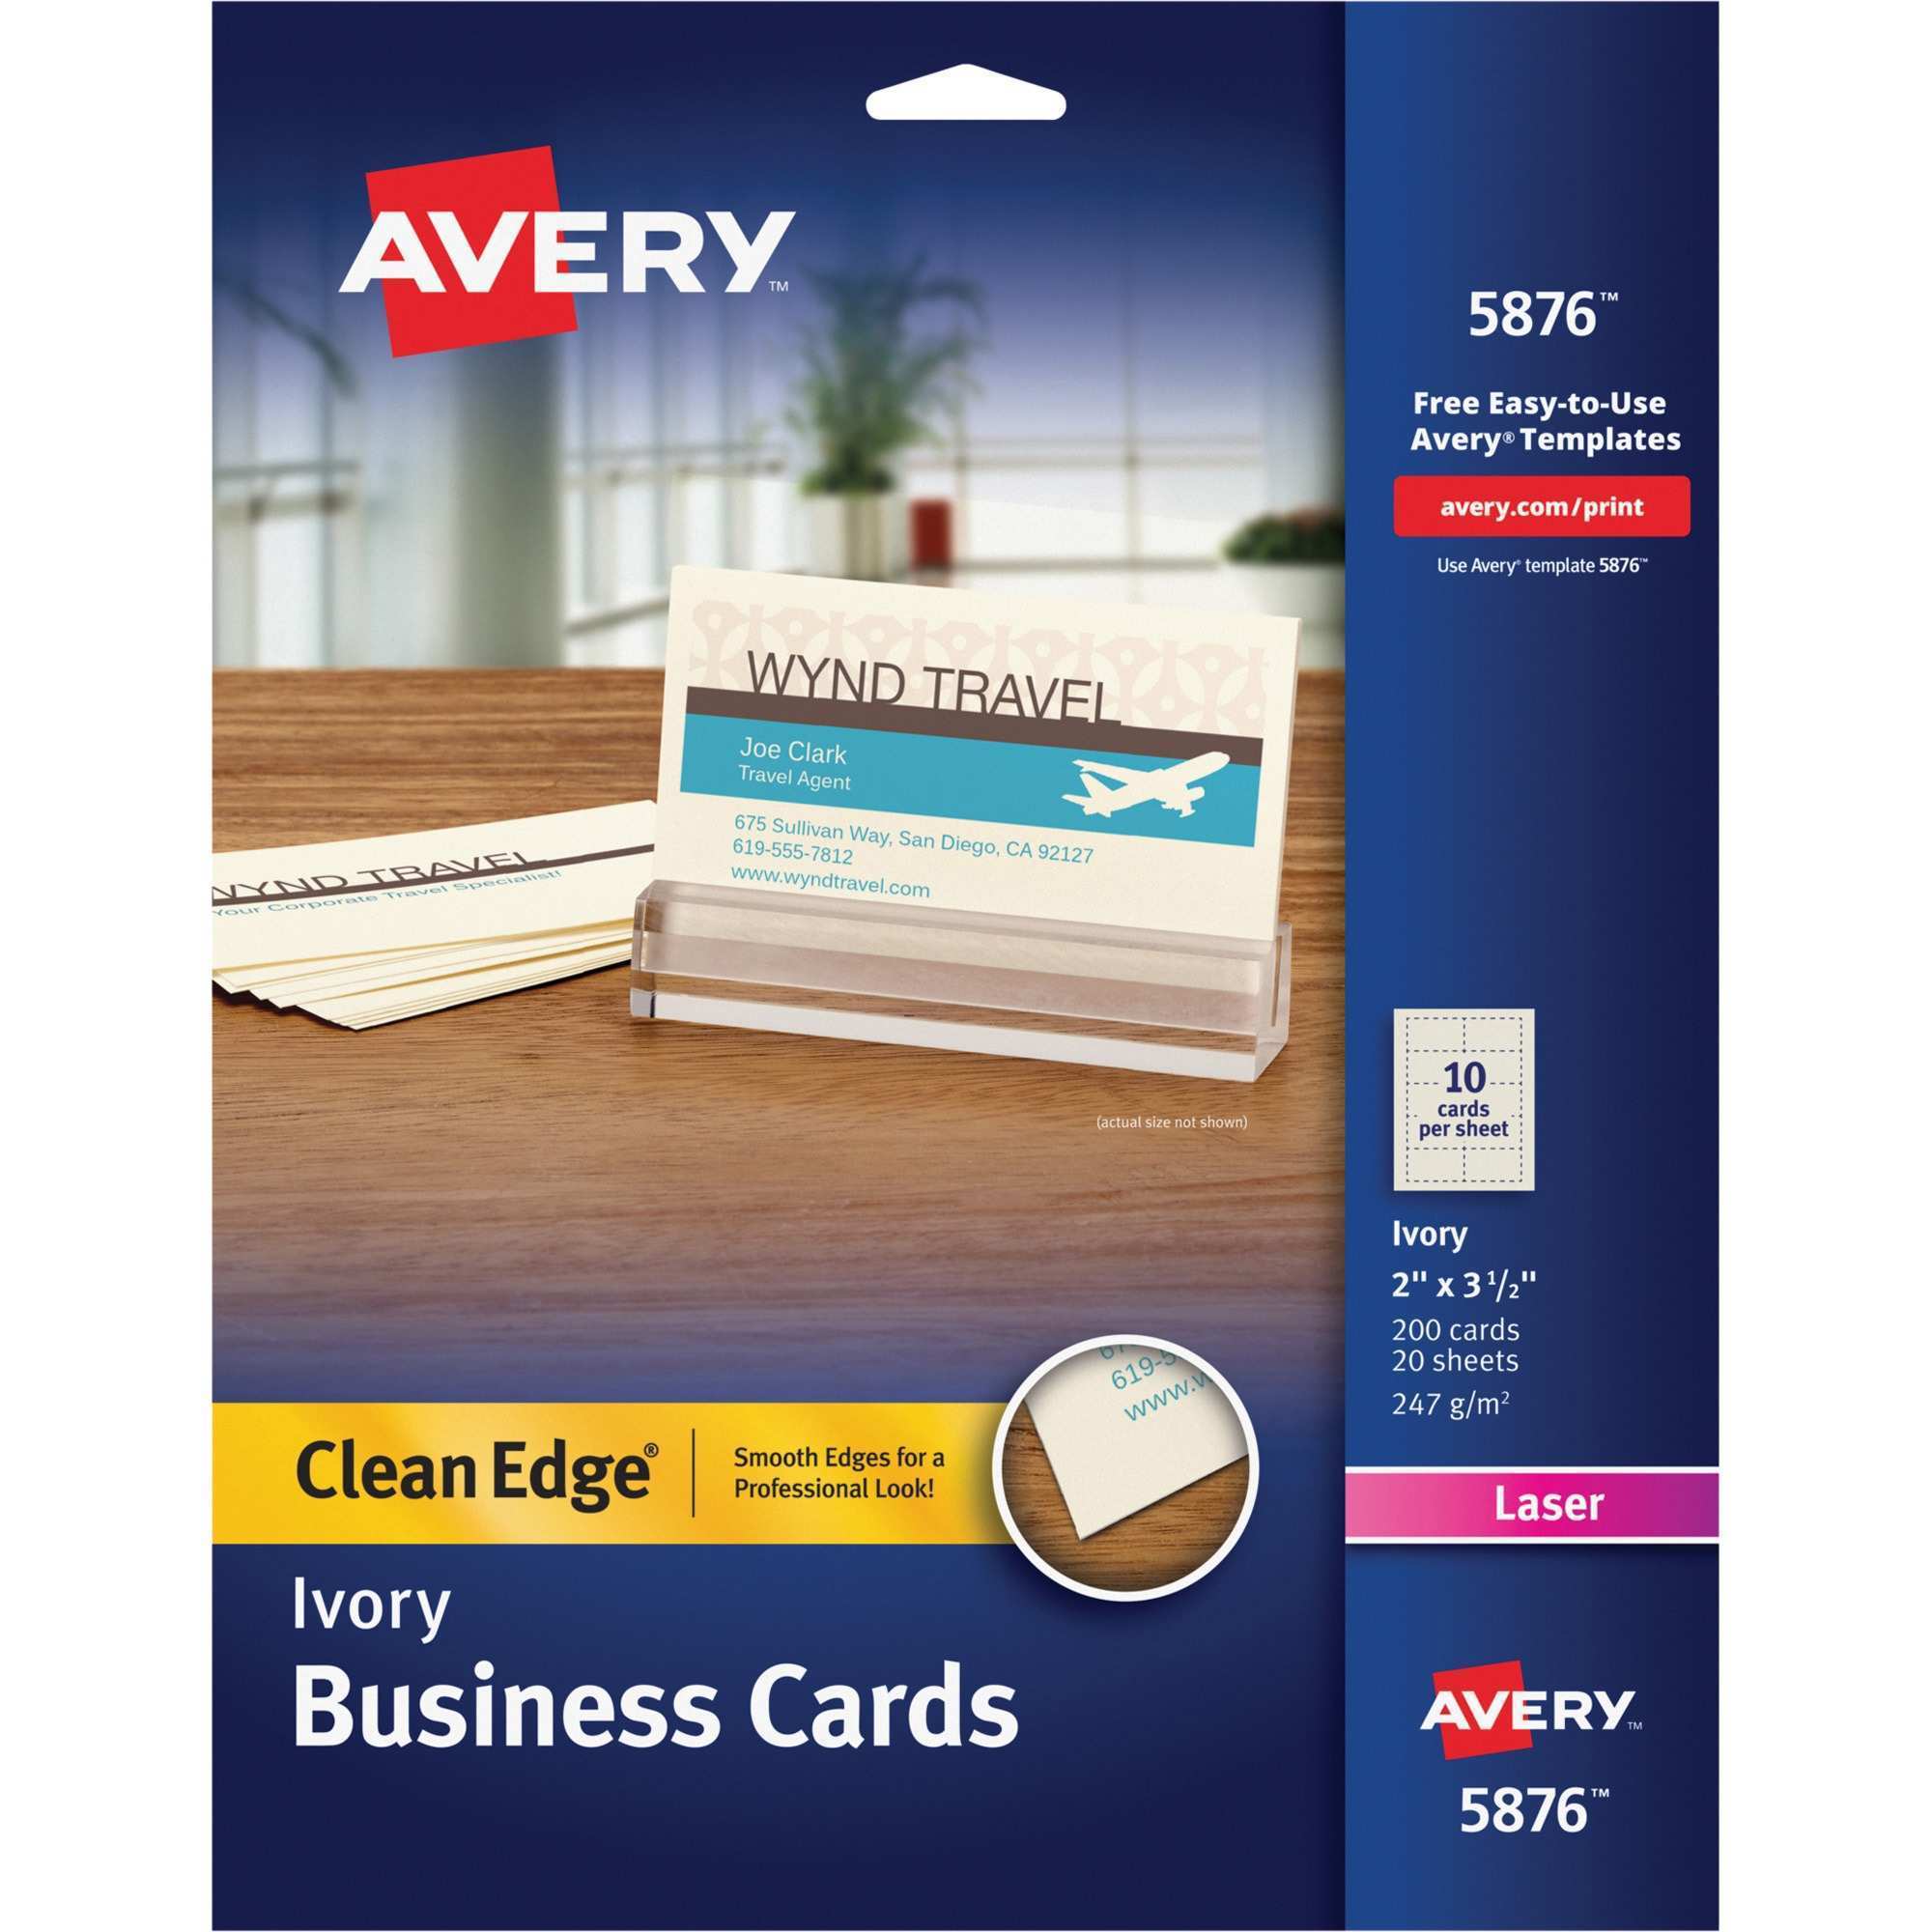 41 Online Avery Business Card Template 5876 in Photoshop for Avery Business Card Template 5876